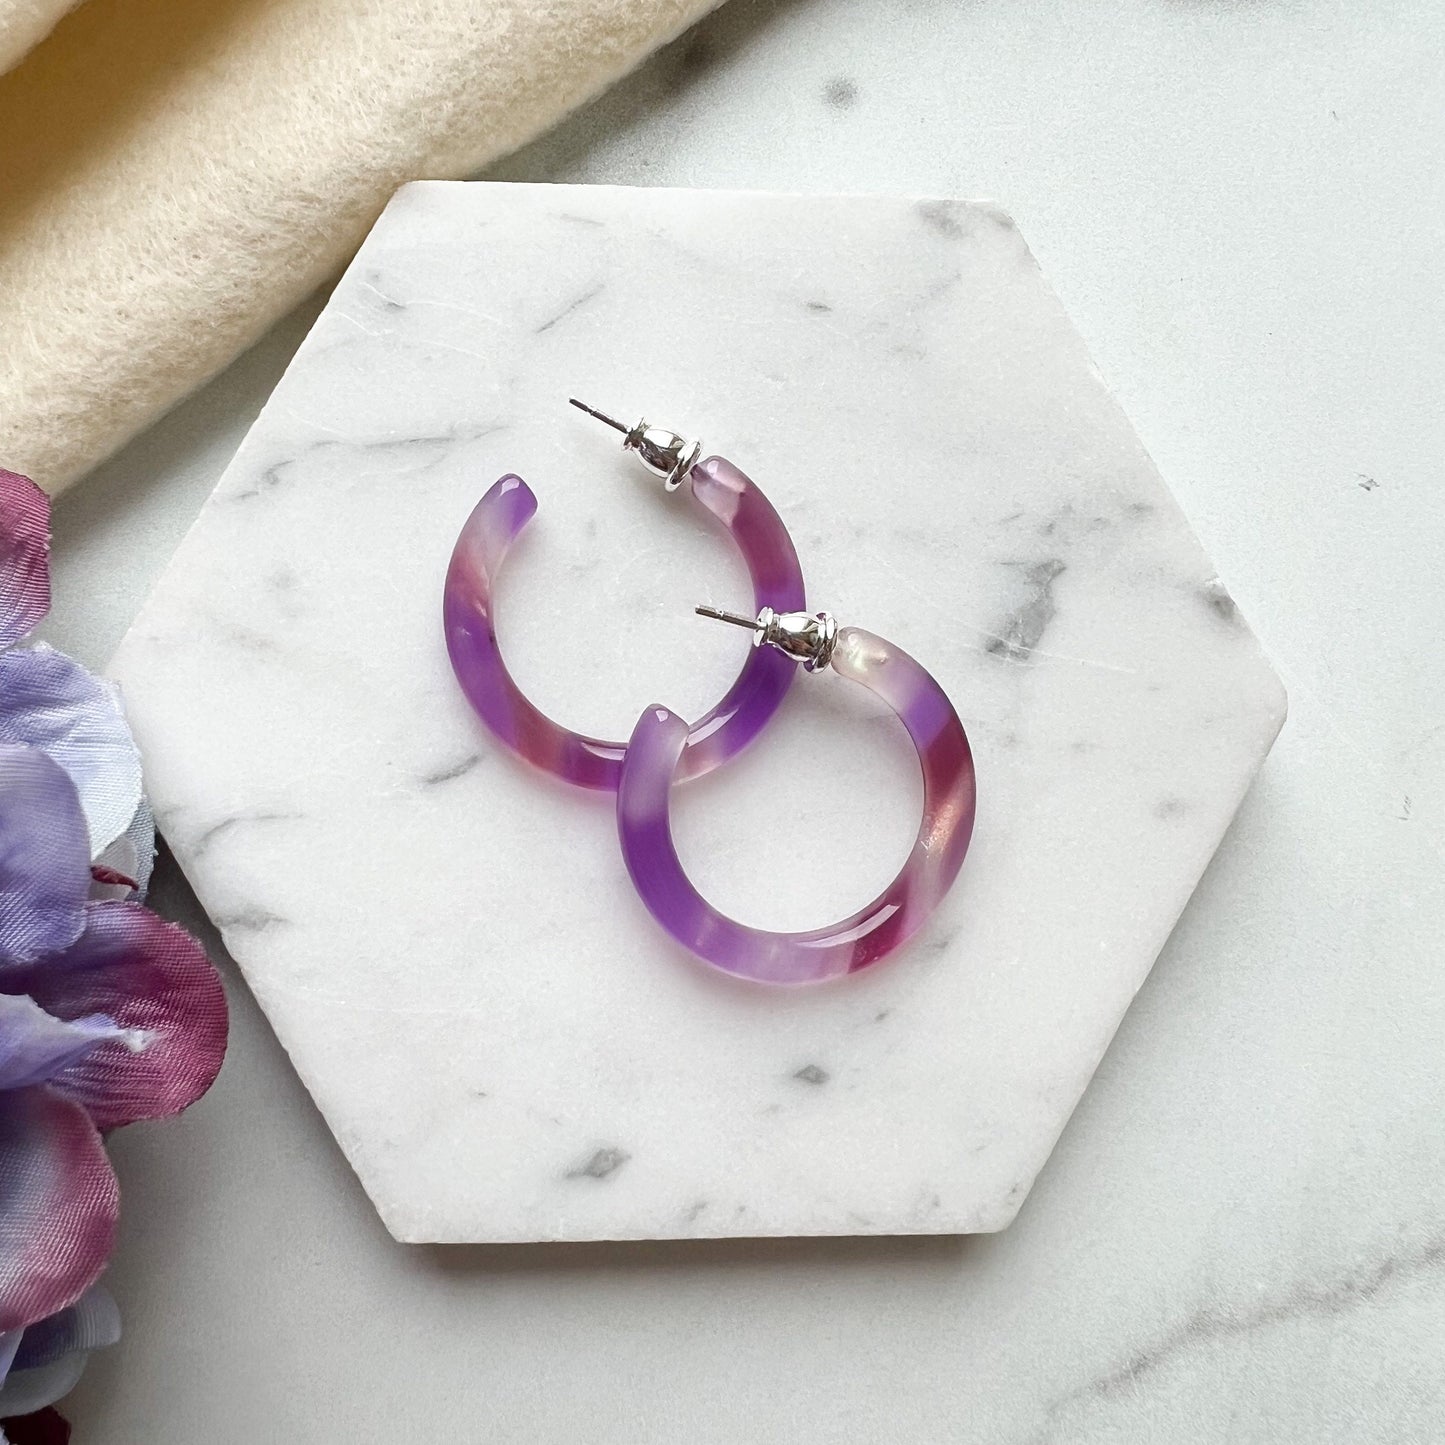 30mm Thin Round Hoops | Hoop Earrings Cellulose Acetate 925 Sterling Silver Posts